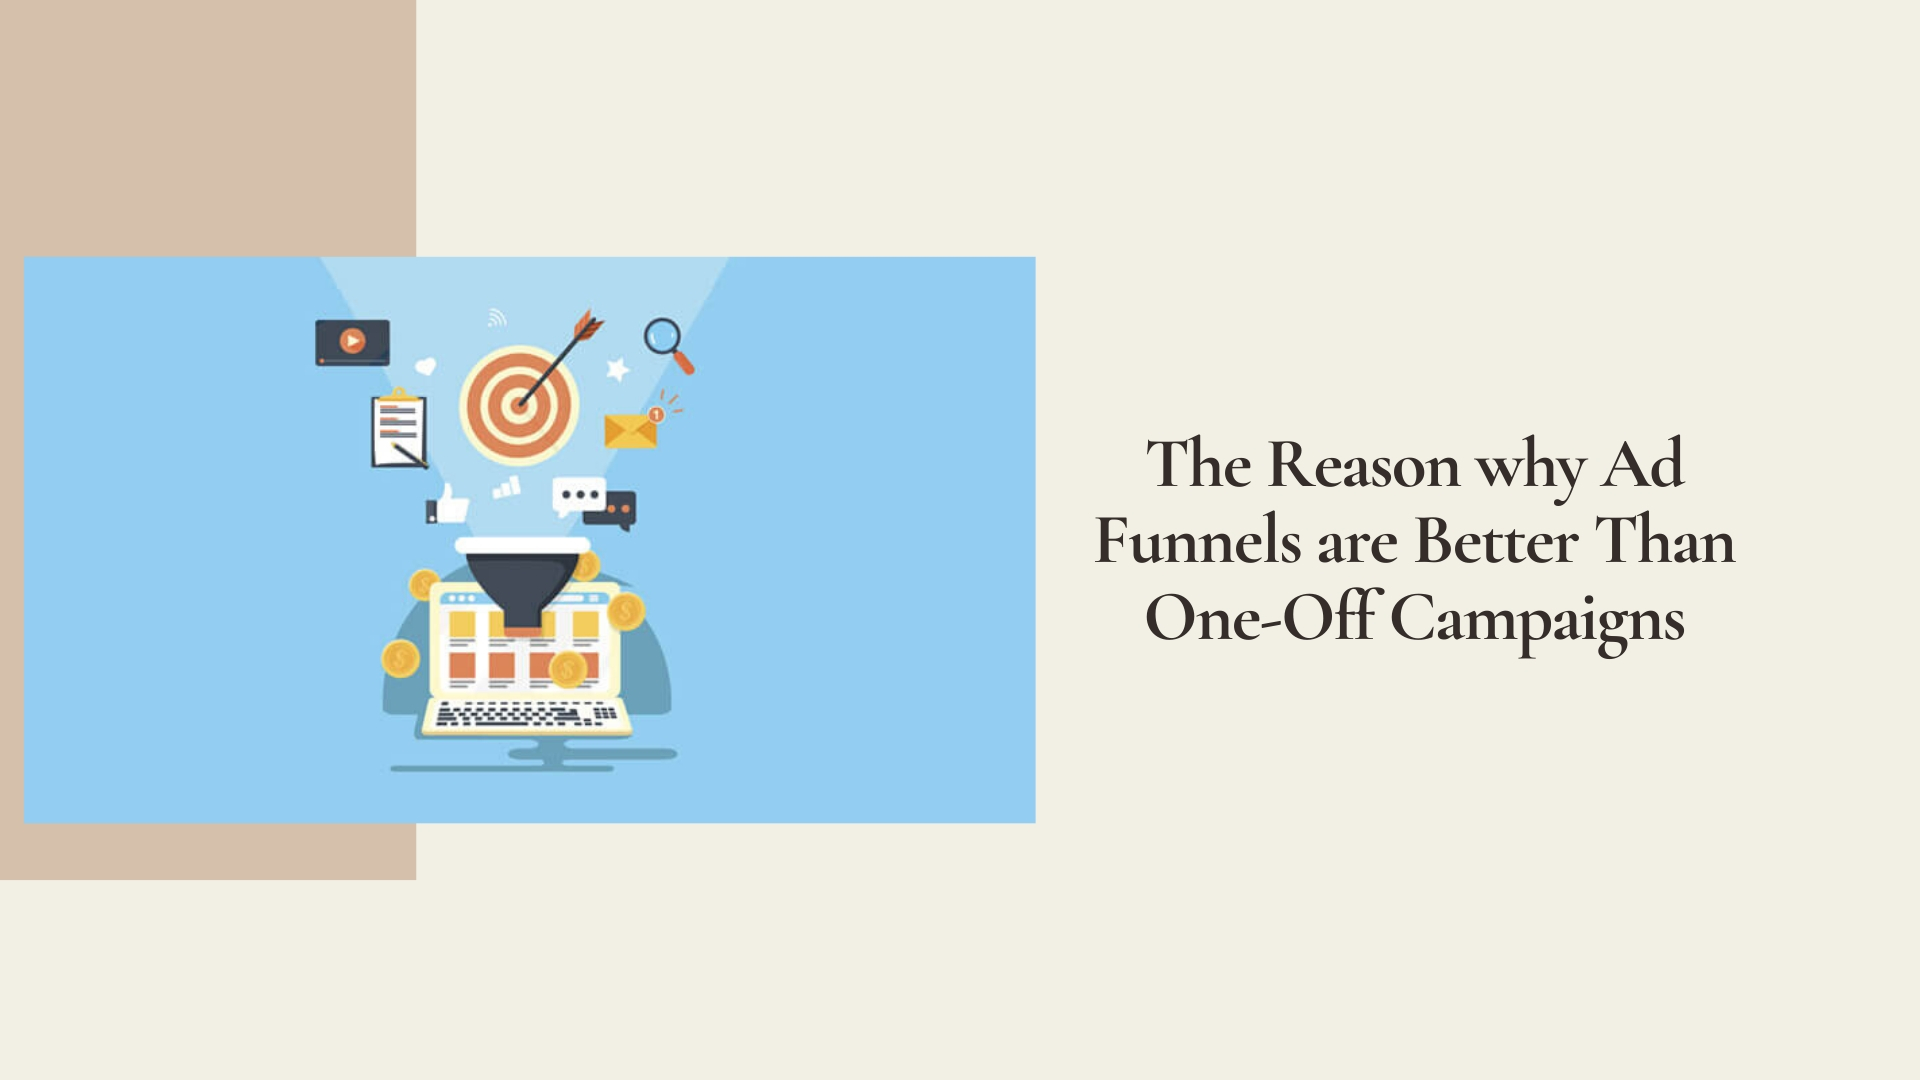 The Reason why Ad Funnels are Better Than One-Off Campaigns